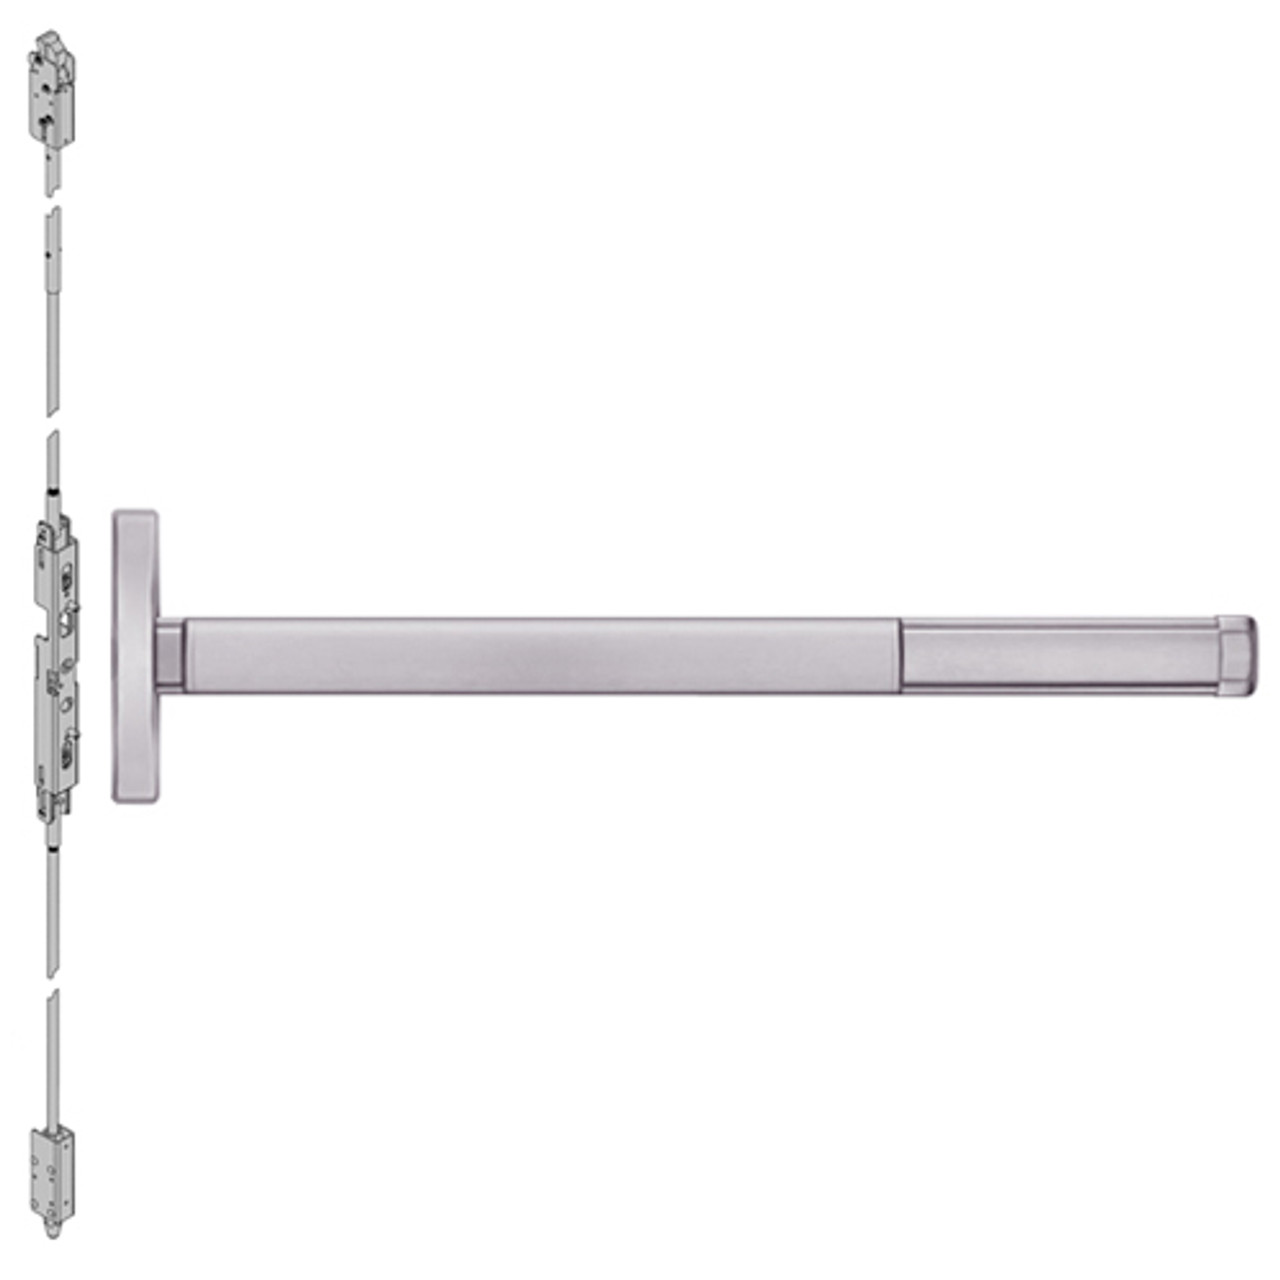 DEFL2608LBR-630-48 PHI 2600 Series Fire Rated Concealed Vertical Rod Exit Device with Delayed Egress Prepped for Key Controls Lever in Satin Stainless Steel Finish